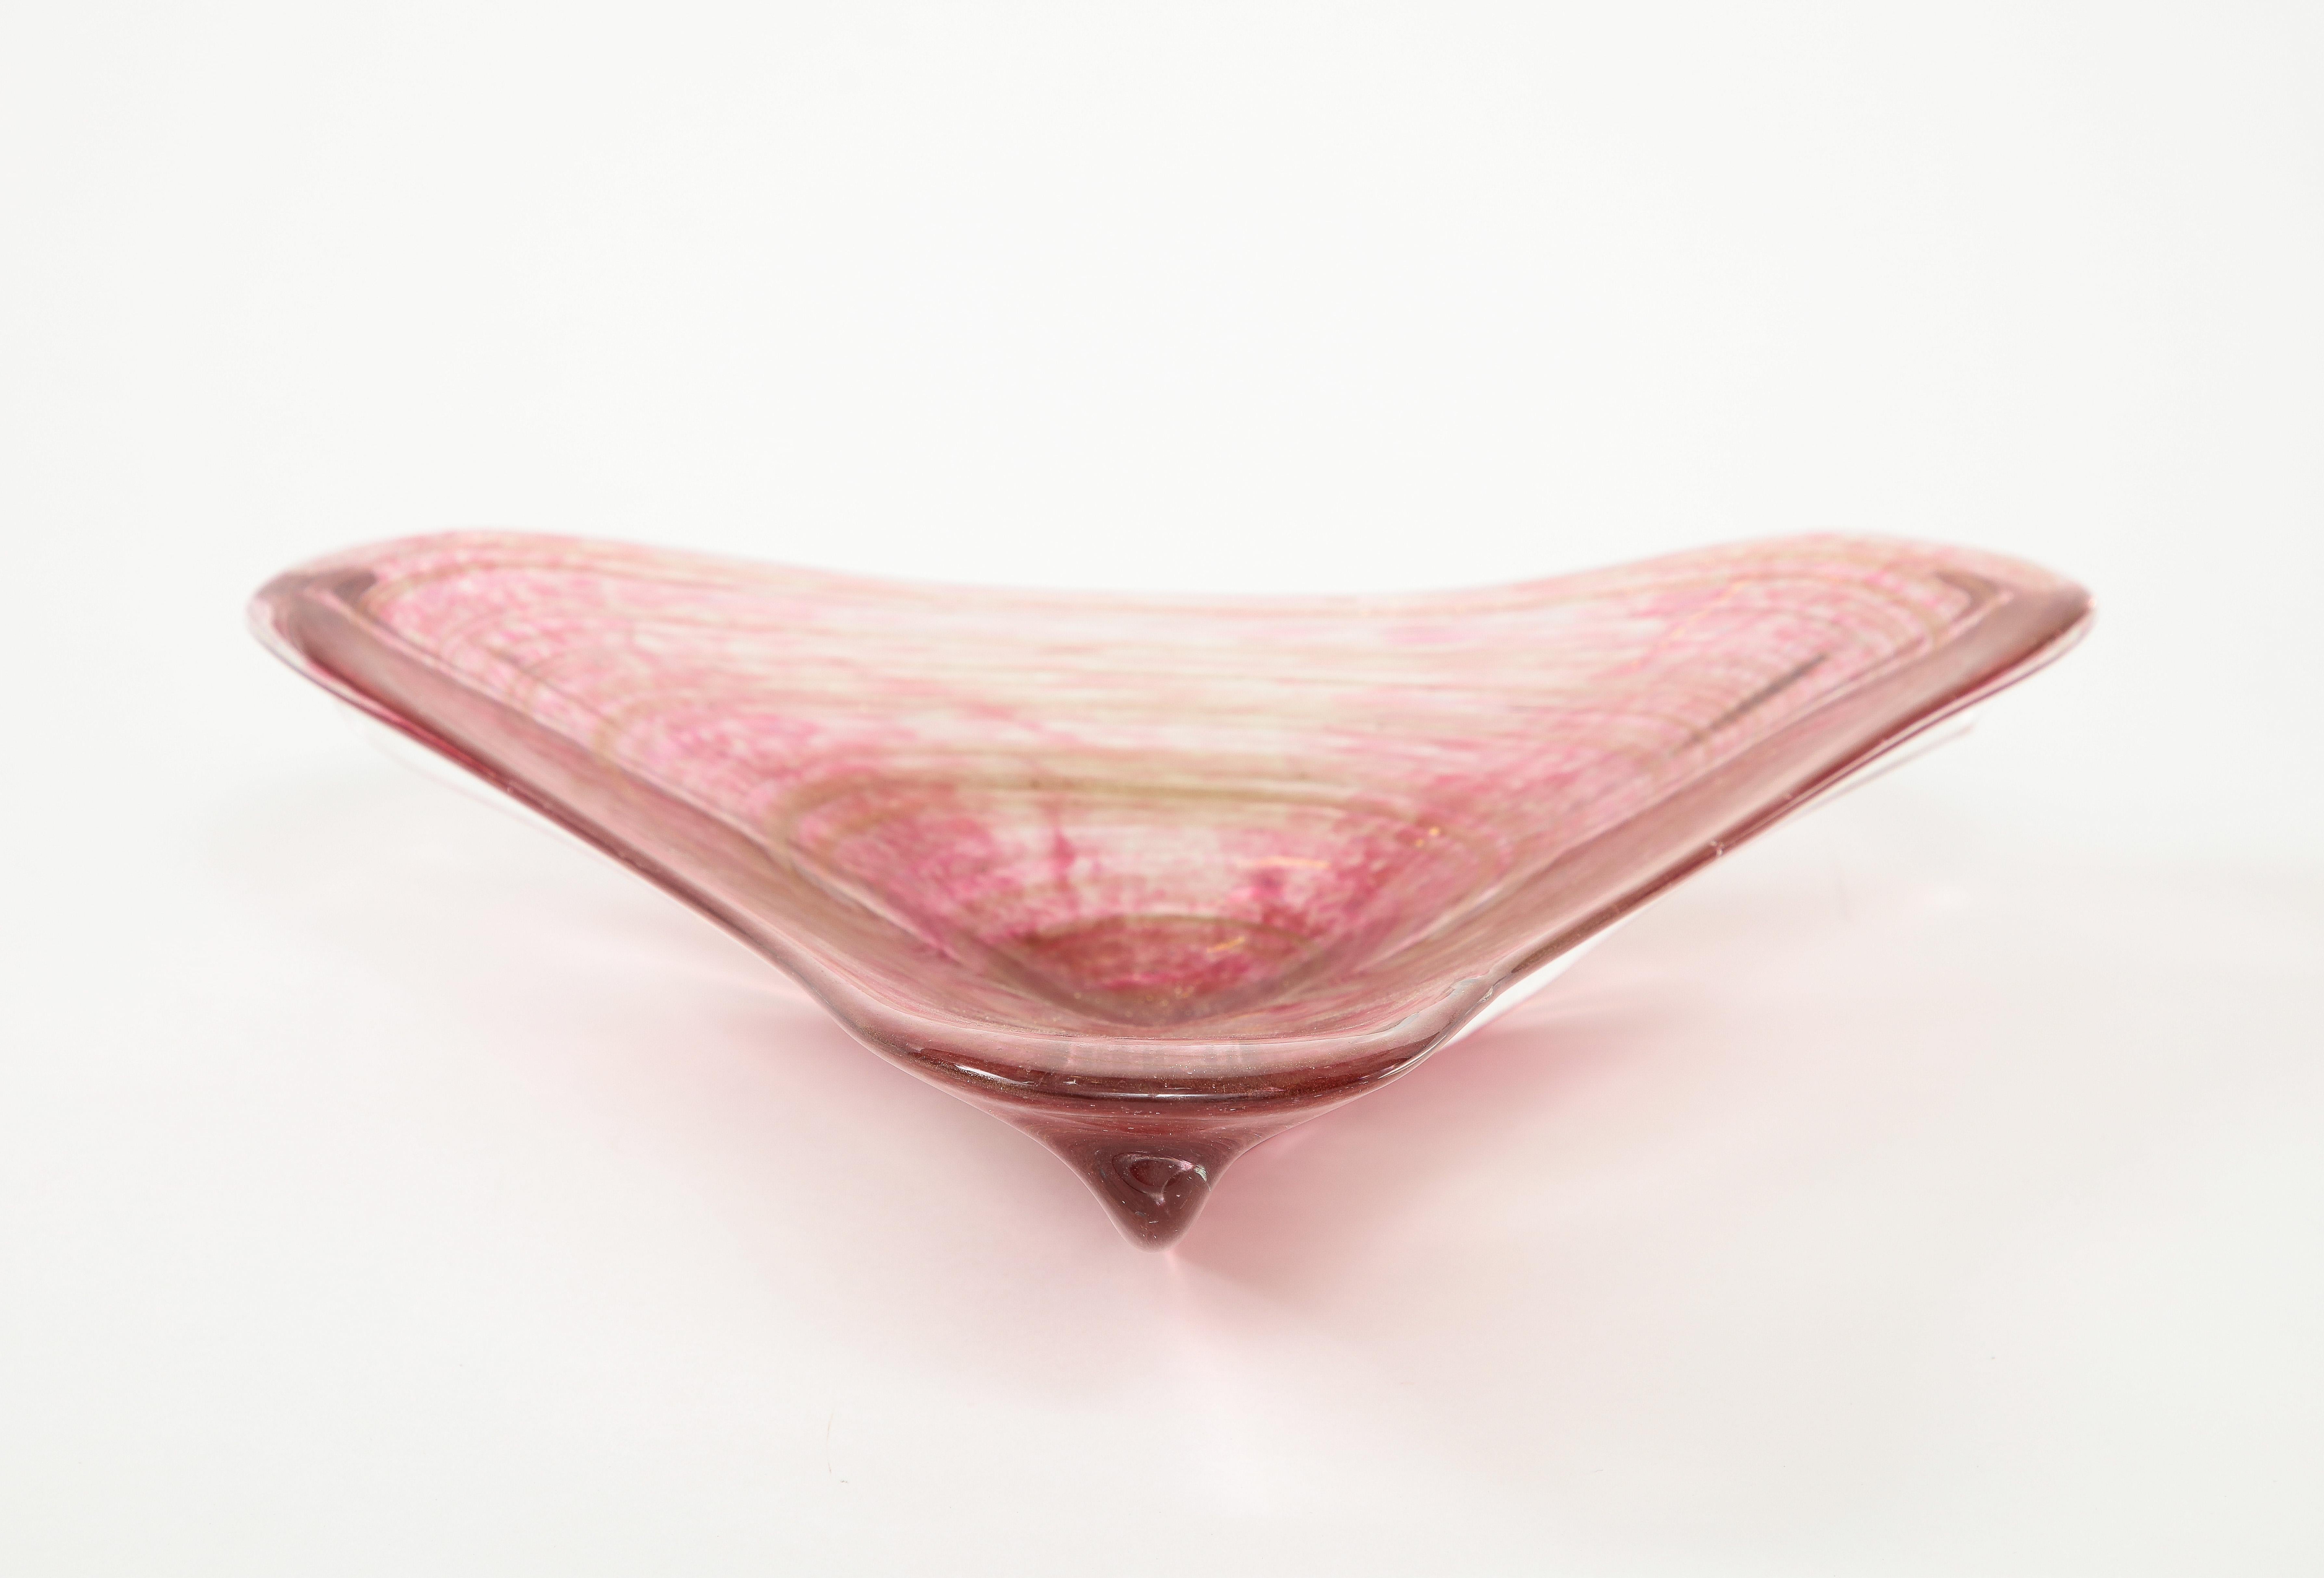 Modernist 1950s Rose colored Murano glass boomer rang shaped glass catch all, featuring gold dust inclusion throughout.